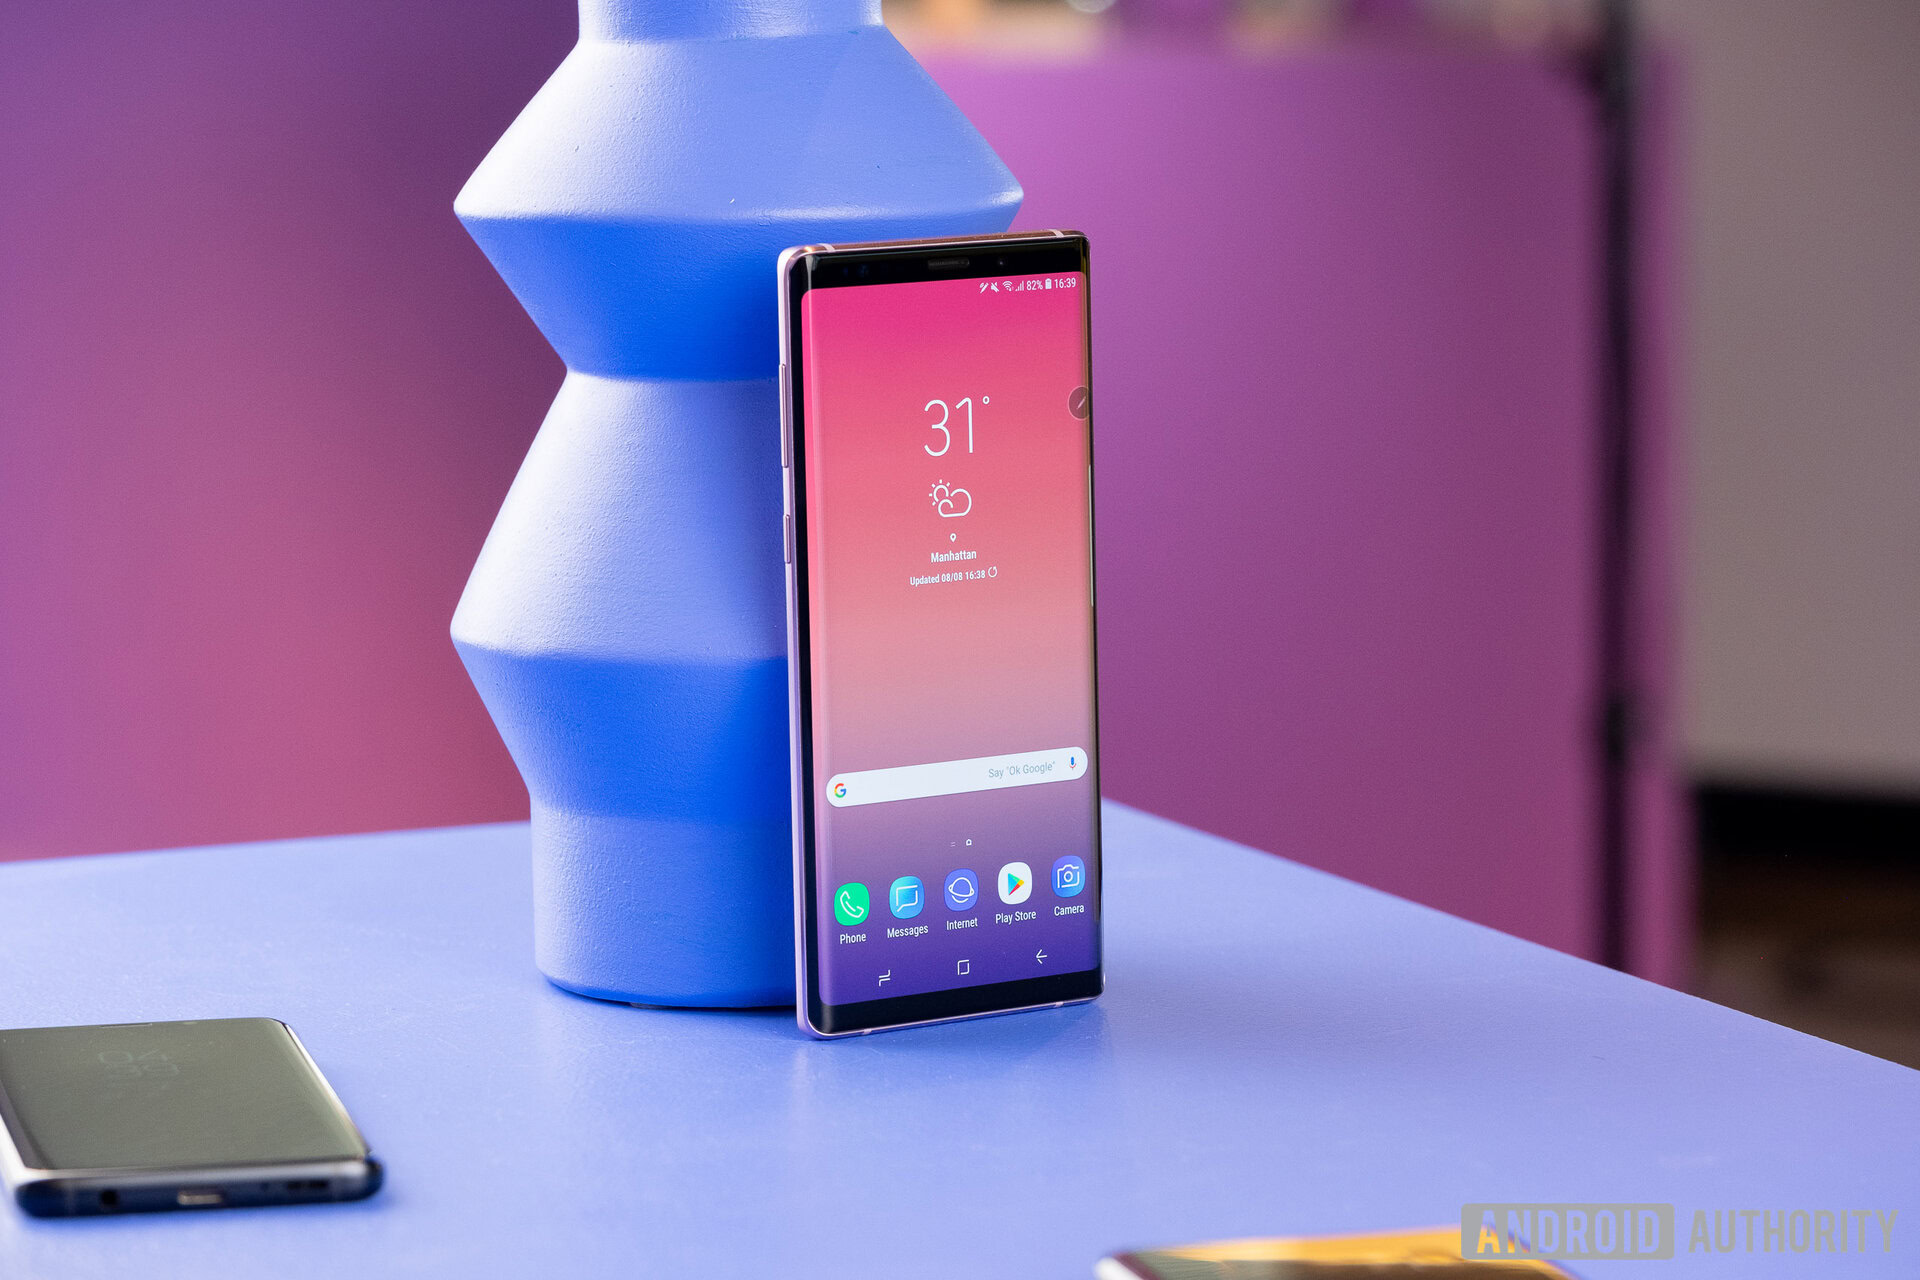 Samsung Galaxy Note 9 is official: Specs - Price & Release Date